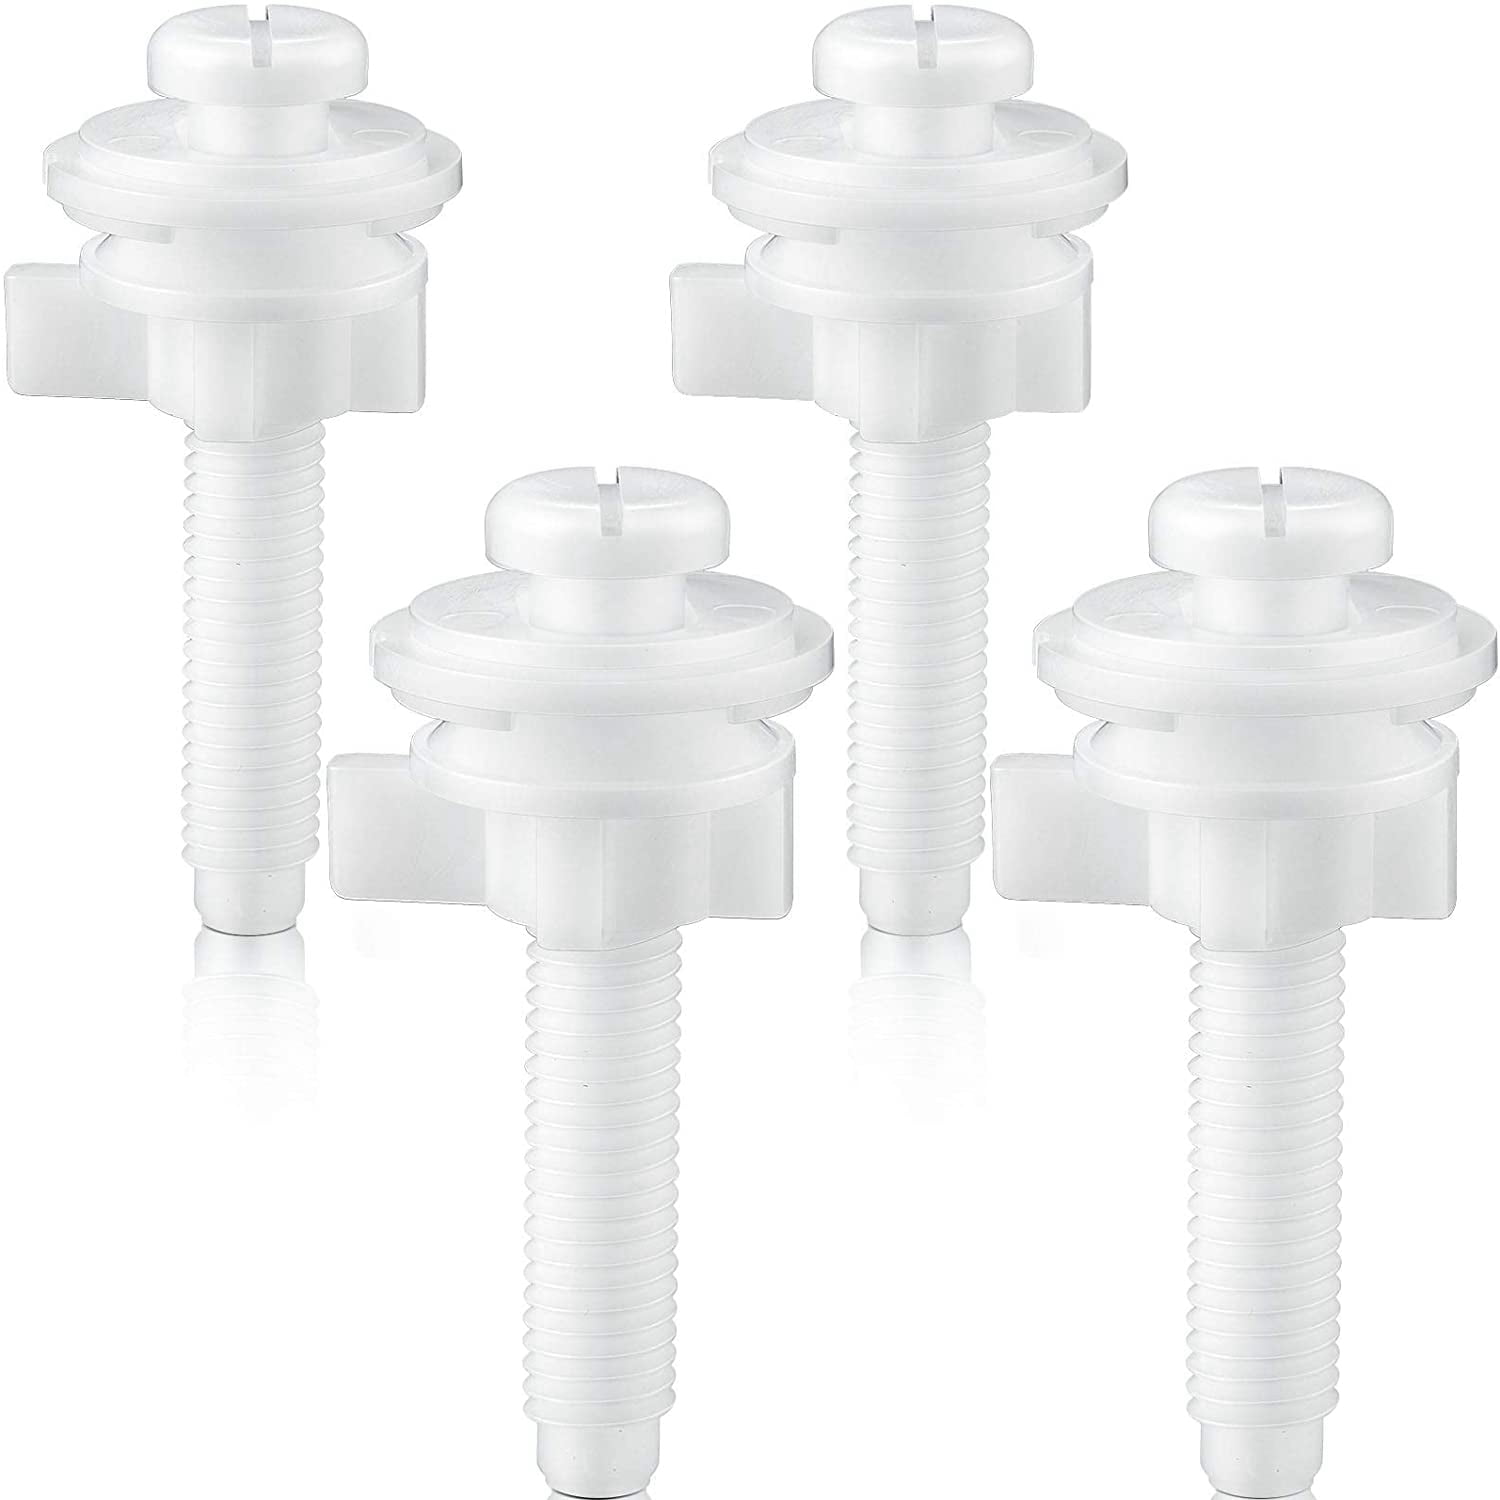 6pcs Toilet Seat Prime Plastic High Quality Sturdy Washers Hinge Bolt for Toliet 